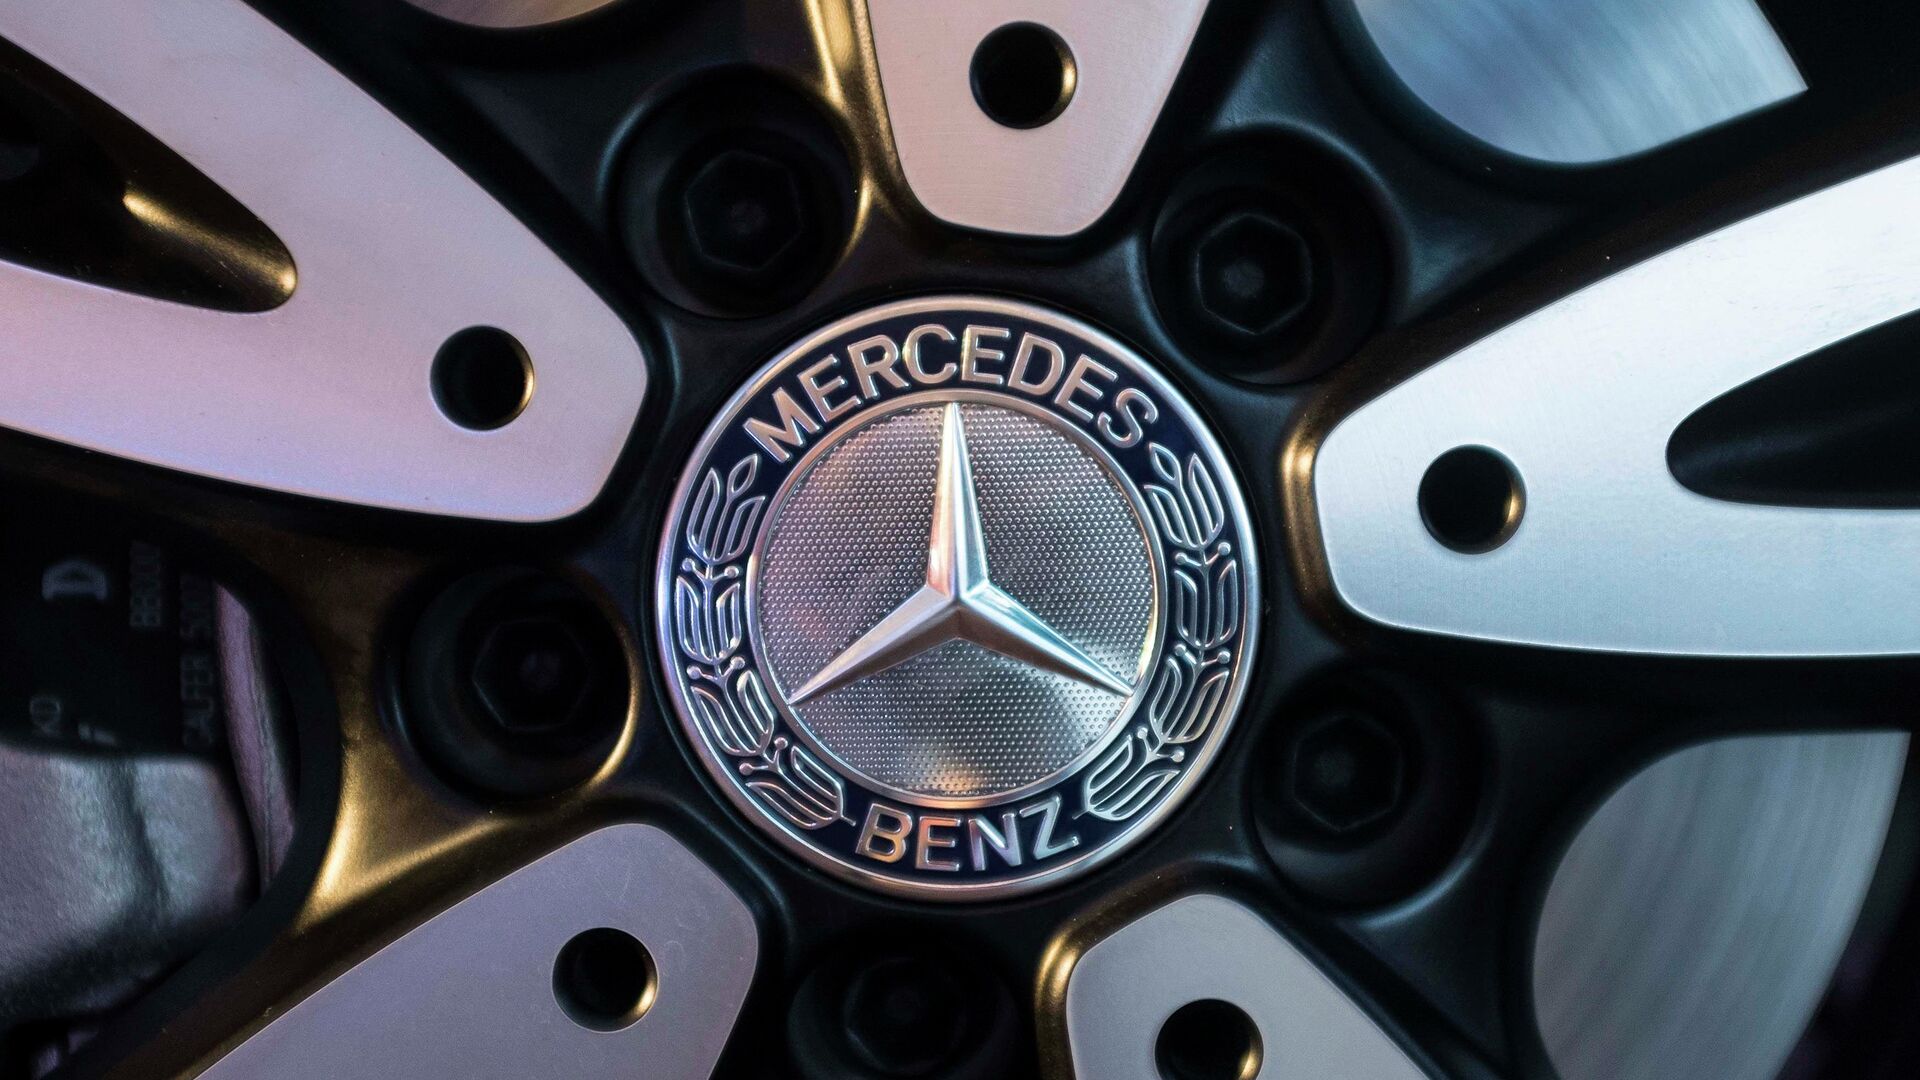 The logo of Mercedes-Benz is seen on the wheel of the new version of A-Class car during its launch in Mumbai - Sputnik International, 1920, 06.02.2022